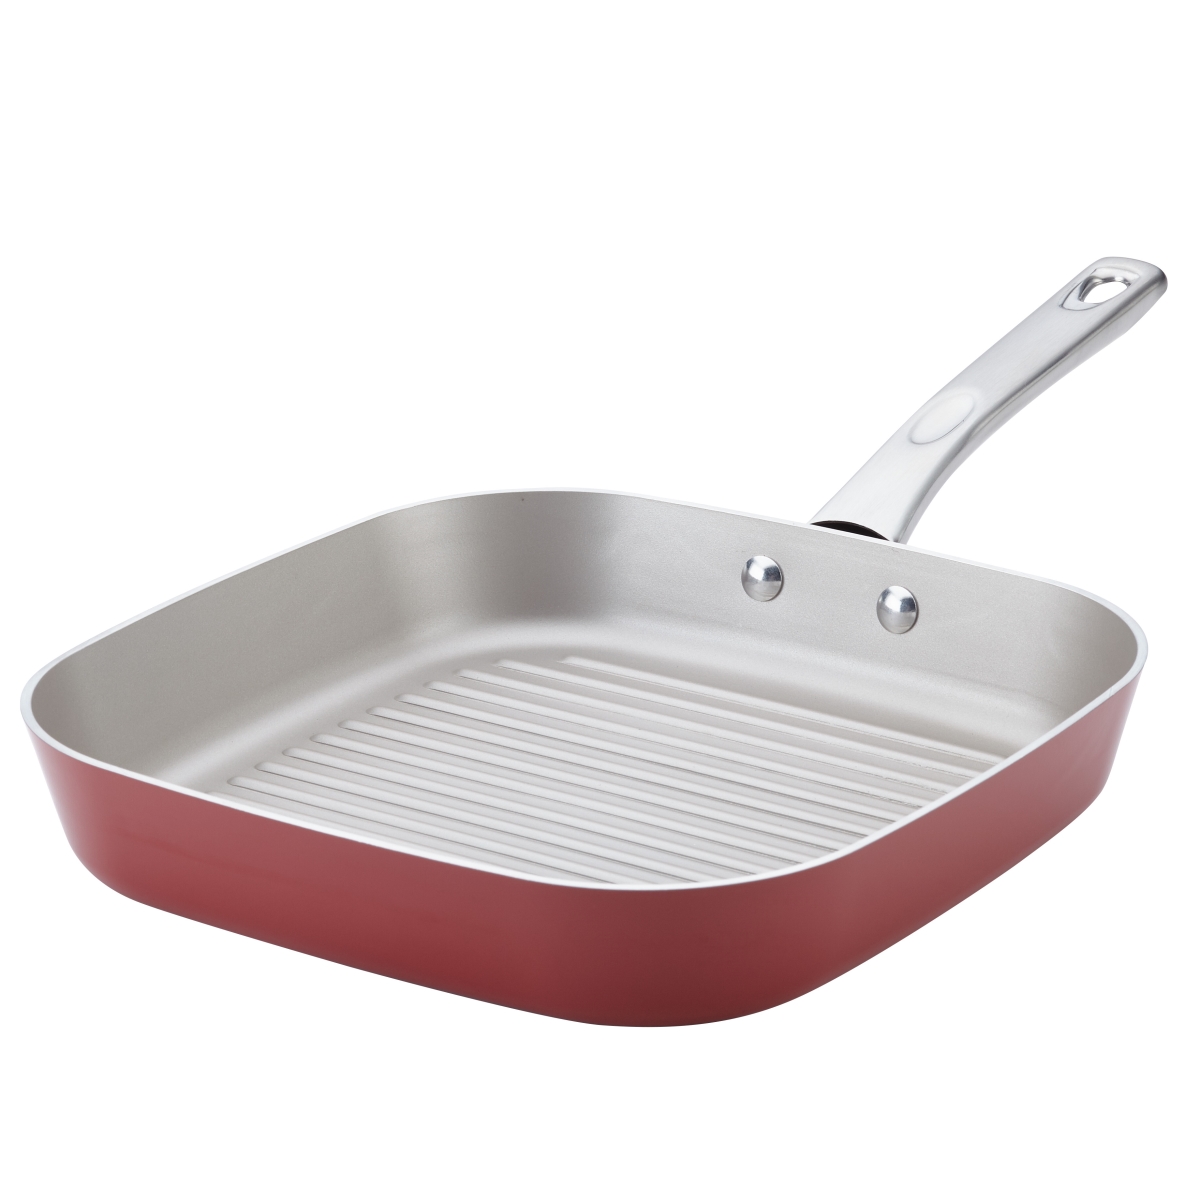 10746 Porcelain Enamel Nonstick Square Grill Pan, 11.25 In. - Sienna Red